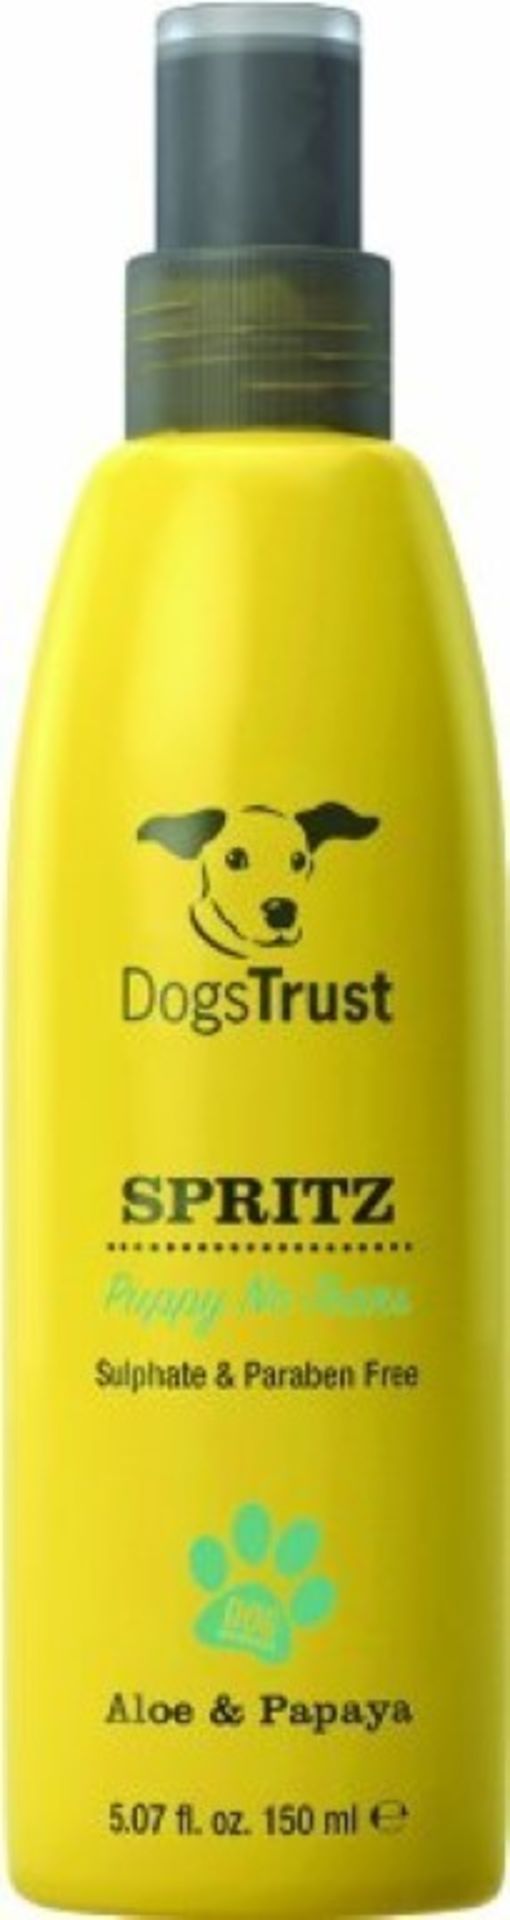 60 x Various Dogs Trust Shampoos and Conditioners - Brand New Stock - CL028 - Includes No Tears, - Image 12 of 15